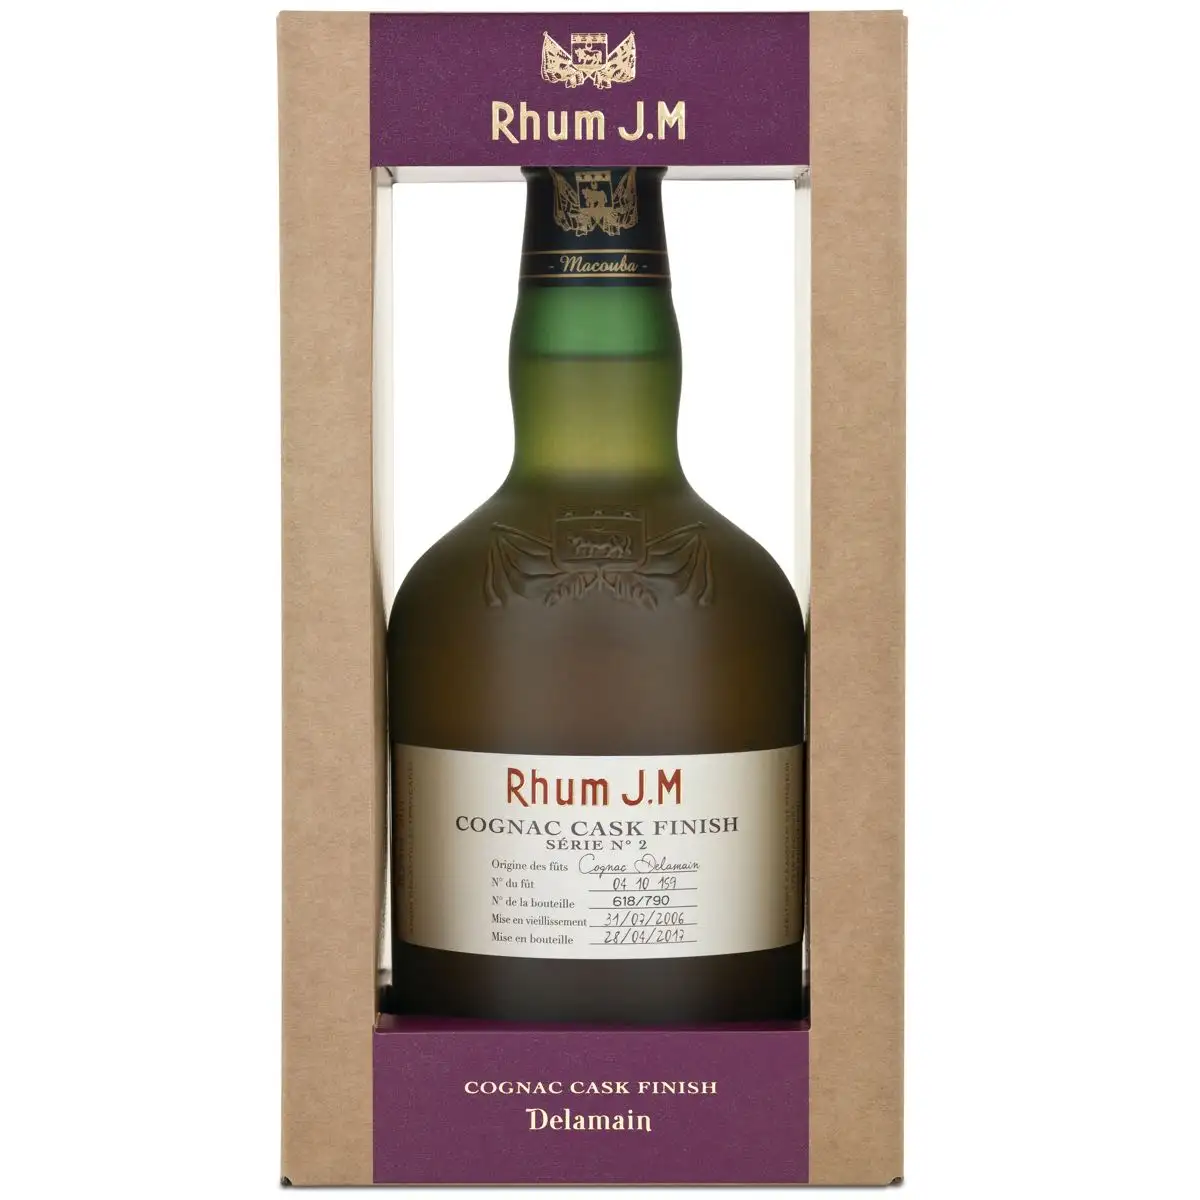 Image of the front of the bottle of the rum Série N°2 Cognac Cask Finish